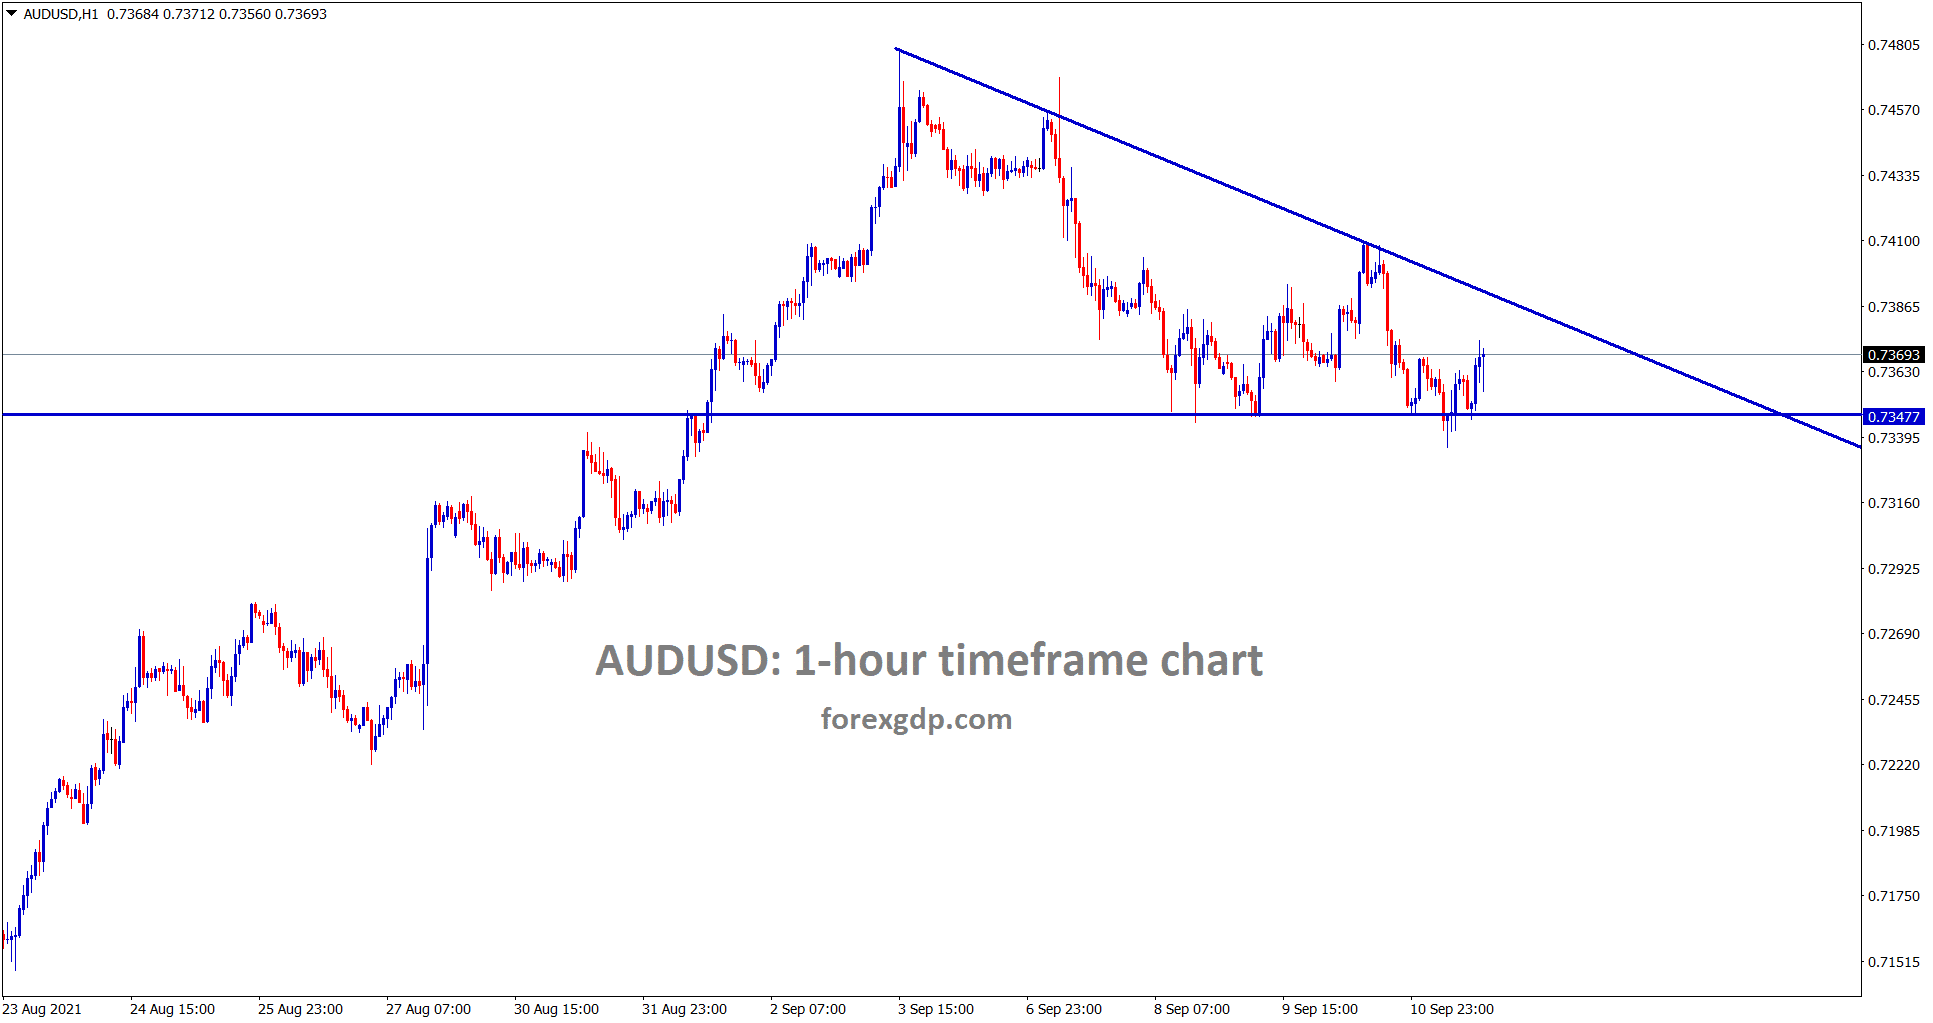 AUDUSD has formed a descending Triangle pattern in the 1 hour timeframe